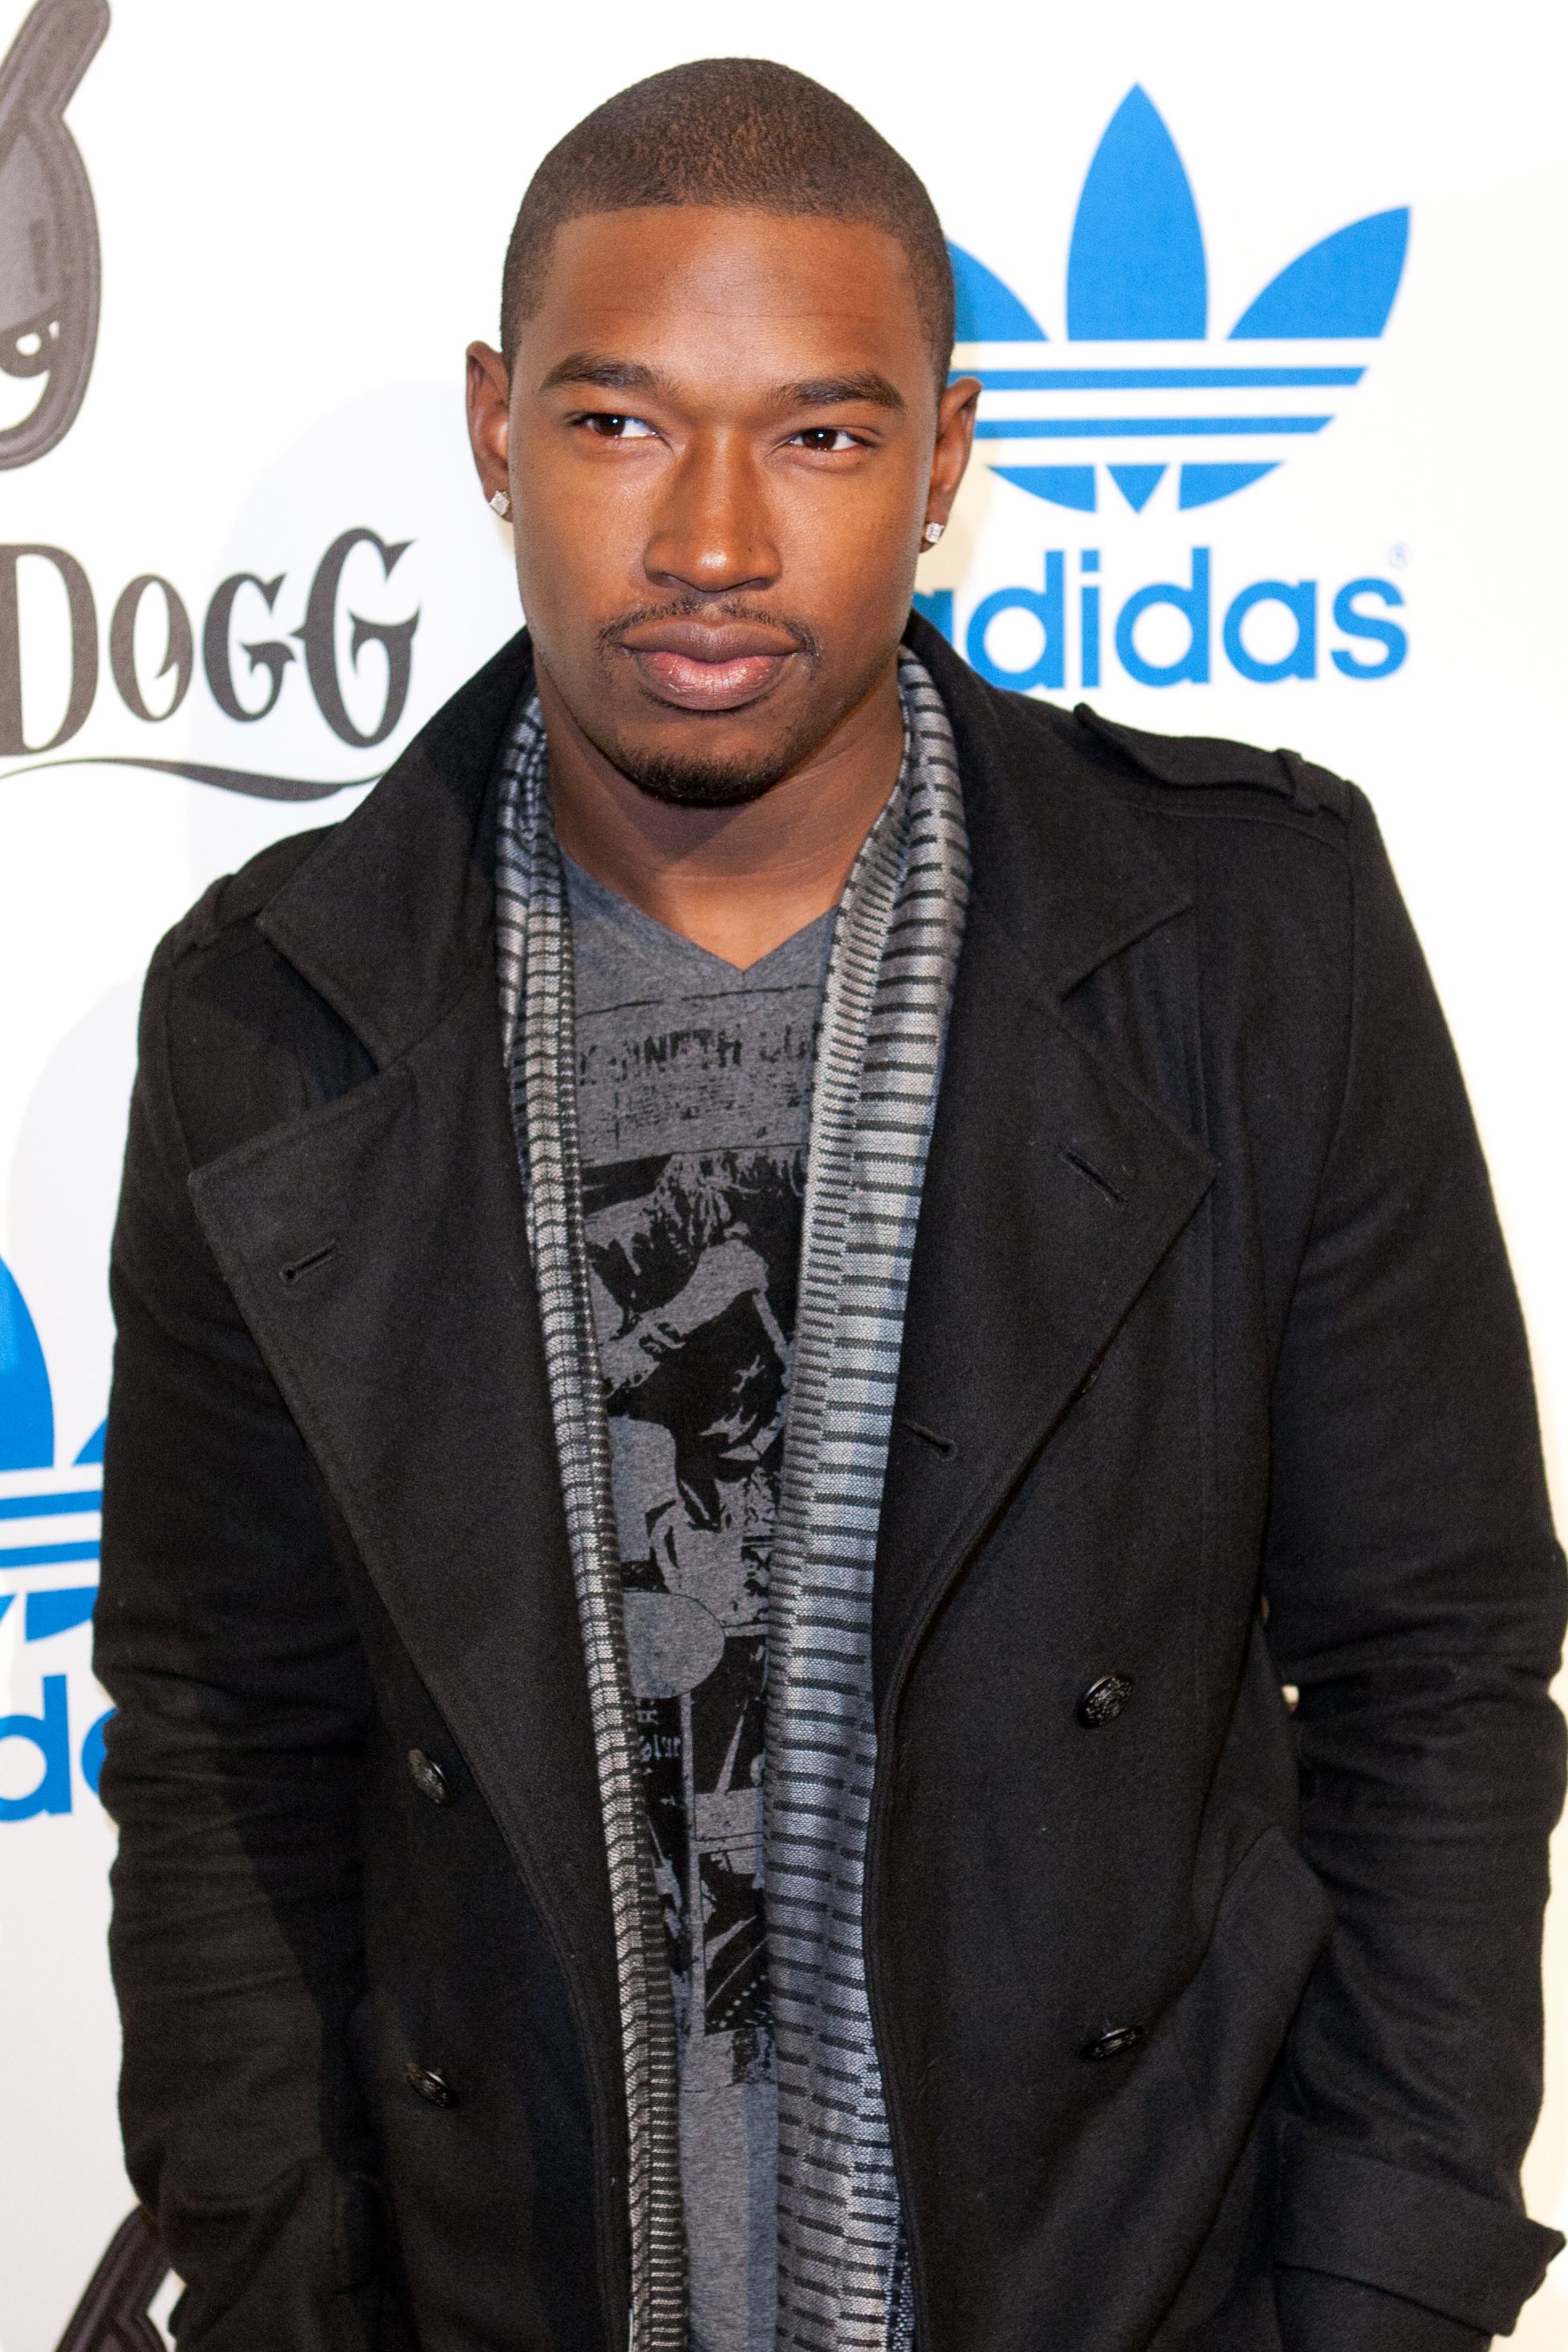 A throwback photo of Kevin McCall sporting a black jacket over a gray shirt and matching color scarf around his neck.